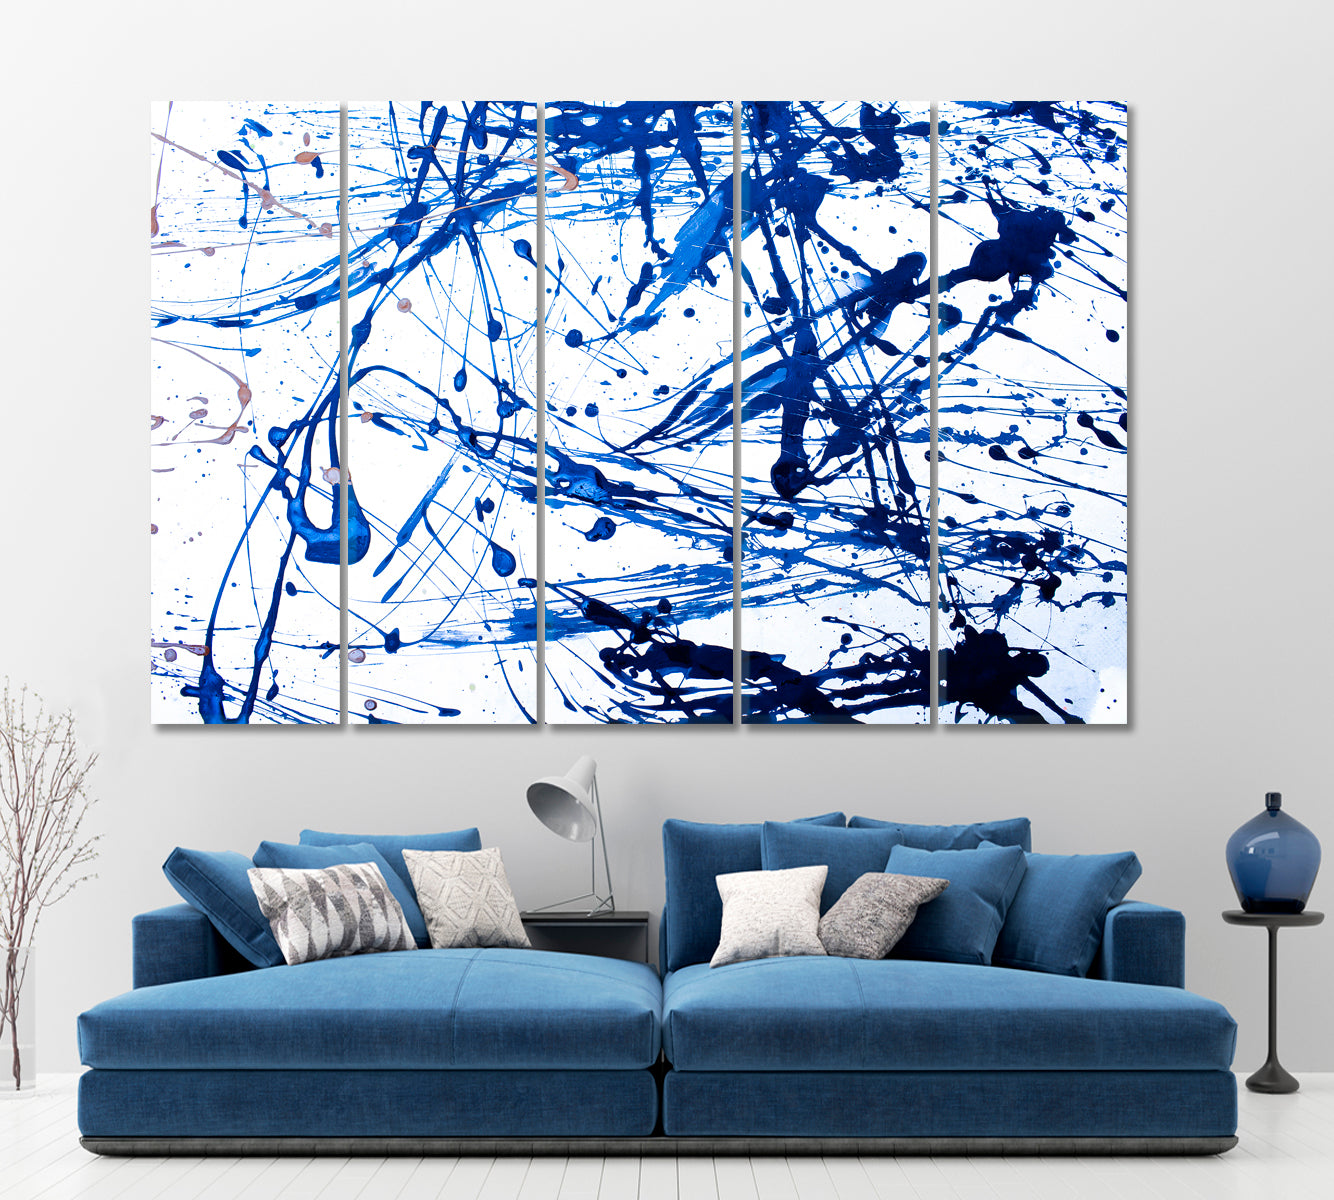 Abstract Artistic Modern Expressionism Contemporary Art Artesty 5 panels 36" x 24" 